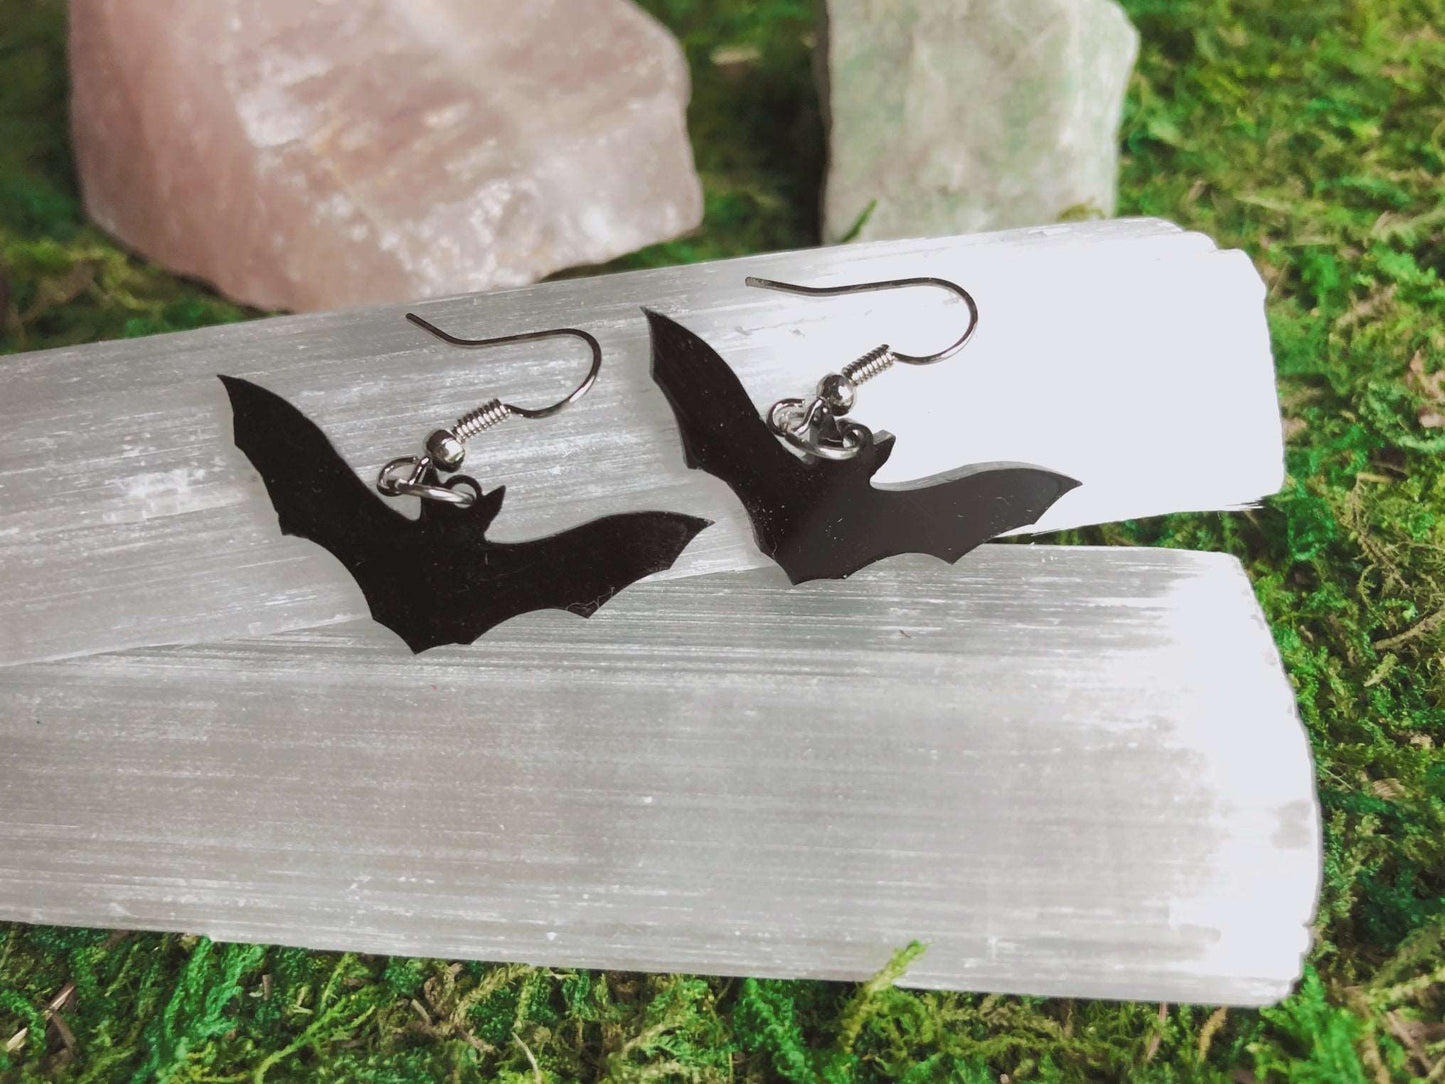 Pictured is a pair of black bat earrings made of acrylic. 